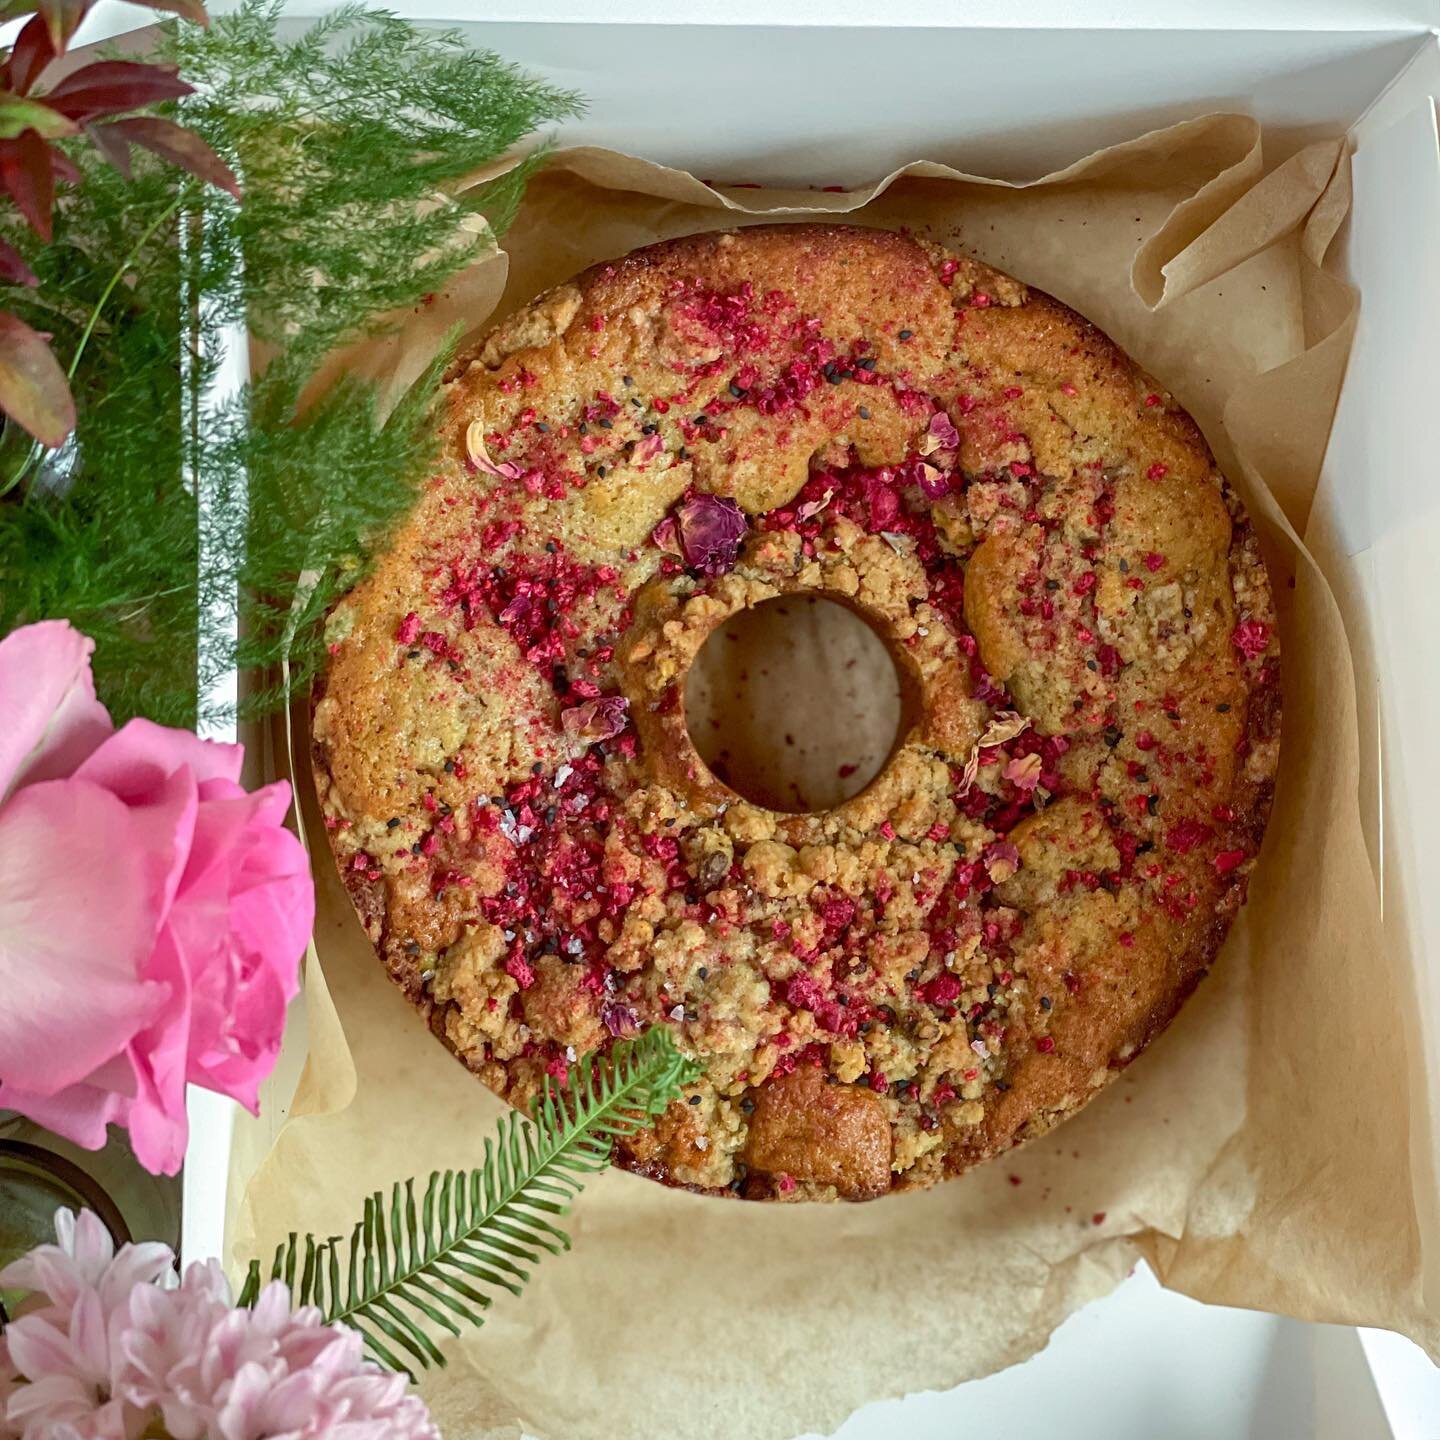 you need this coffee cake in your life 😍 @clivebakeshop ... it actually tastes as good as it looks. the description of the cake was as advertised &ldquo;extremely flavorful, moist and satisfying. 10 out 10&rdquo;. I loved the notes of cardamom, pist